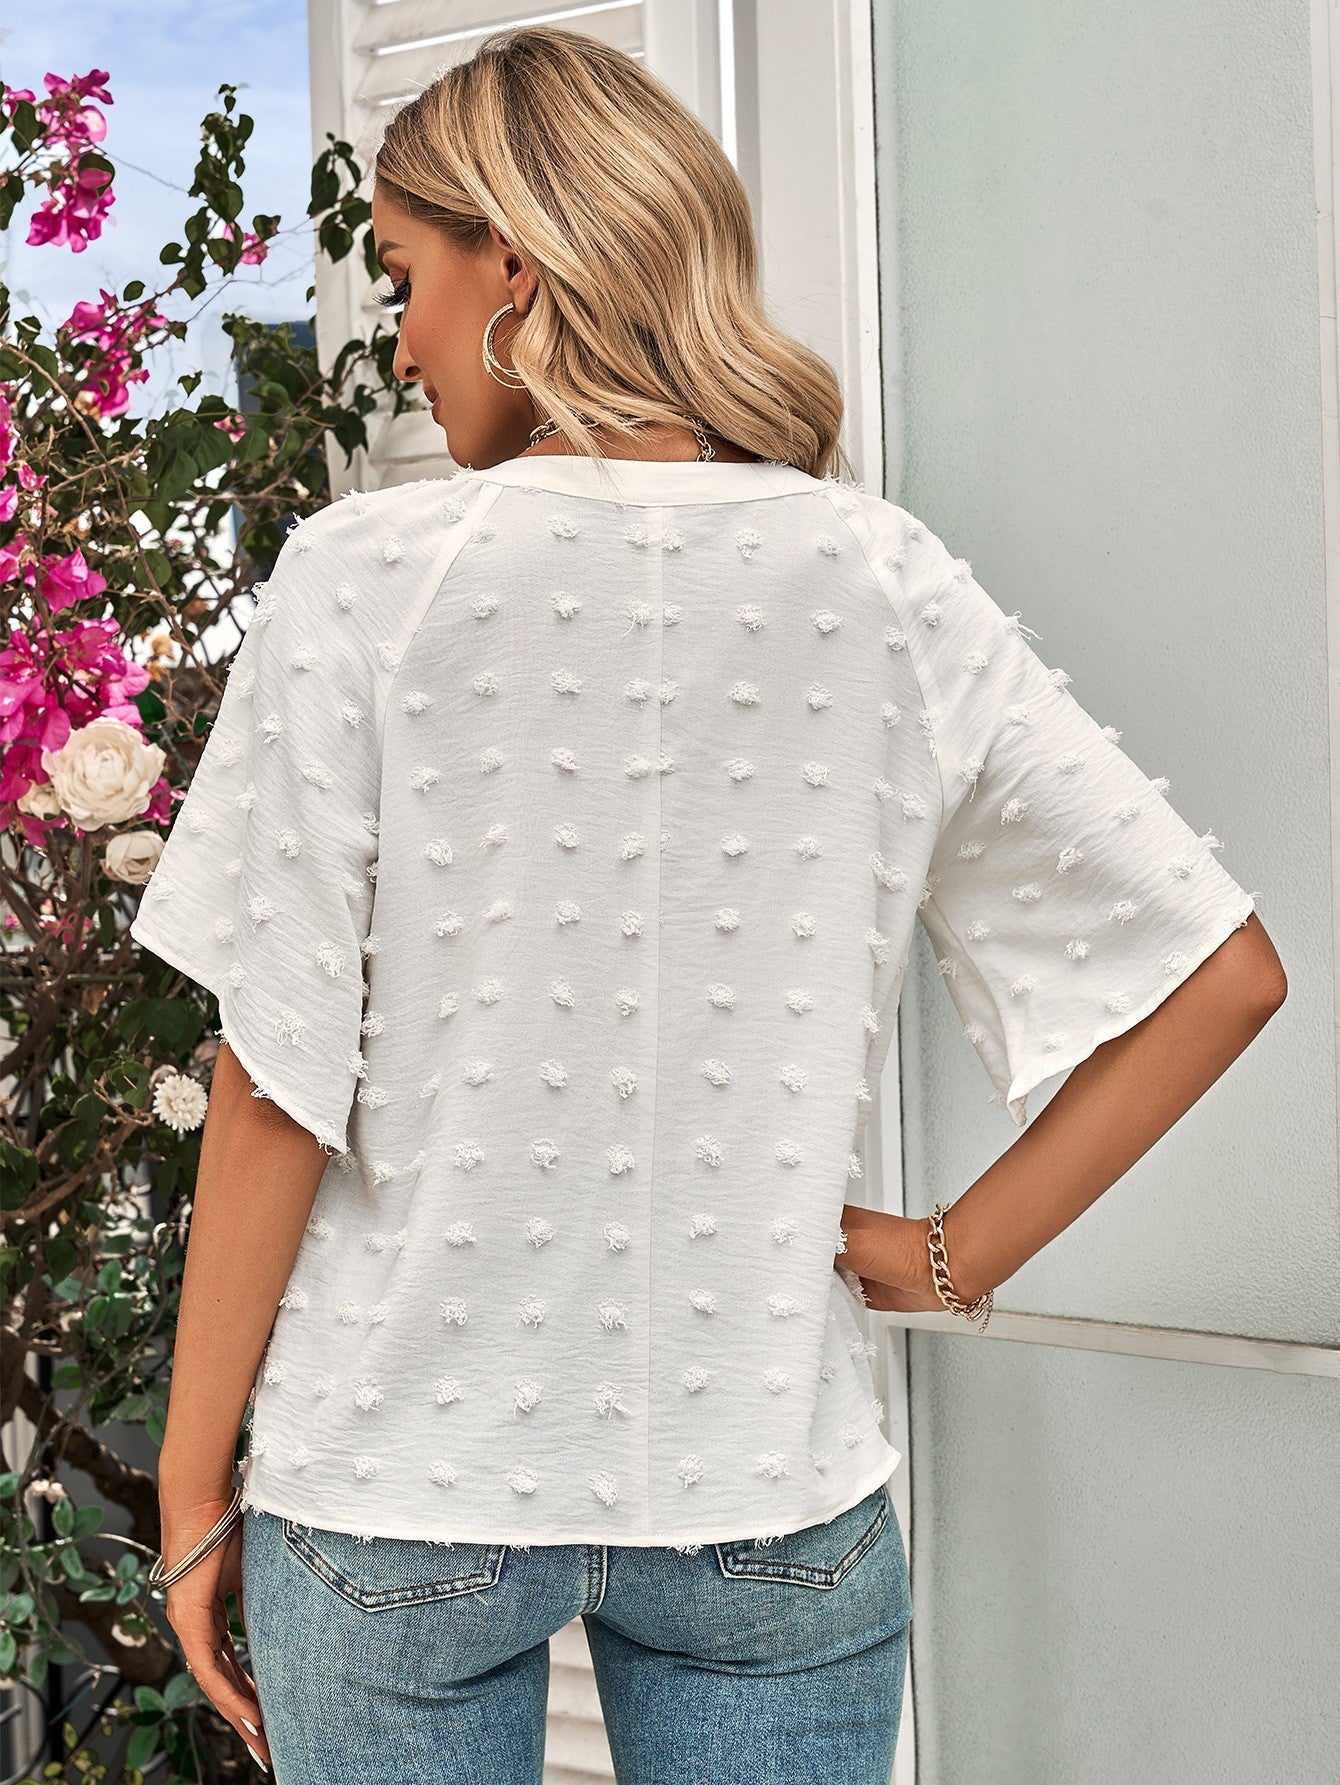 Swiss Dot Notched Neck Flare Sleeve Blouse (3 Colors)  Krazy Heart Designs Boutique   